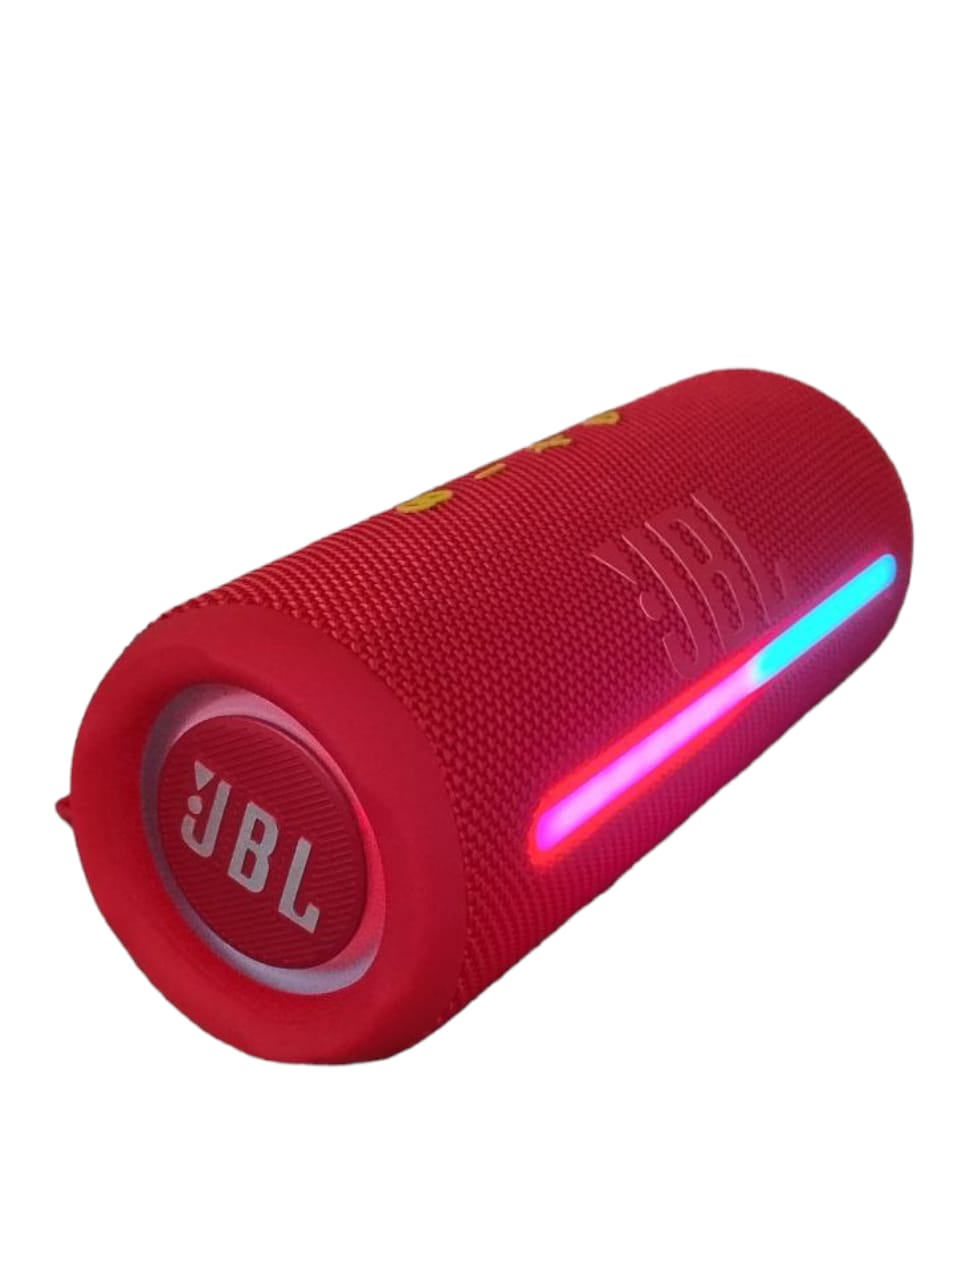 Parlante JBL Charge 3 inalámbric Bluetooth negro